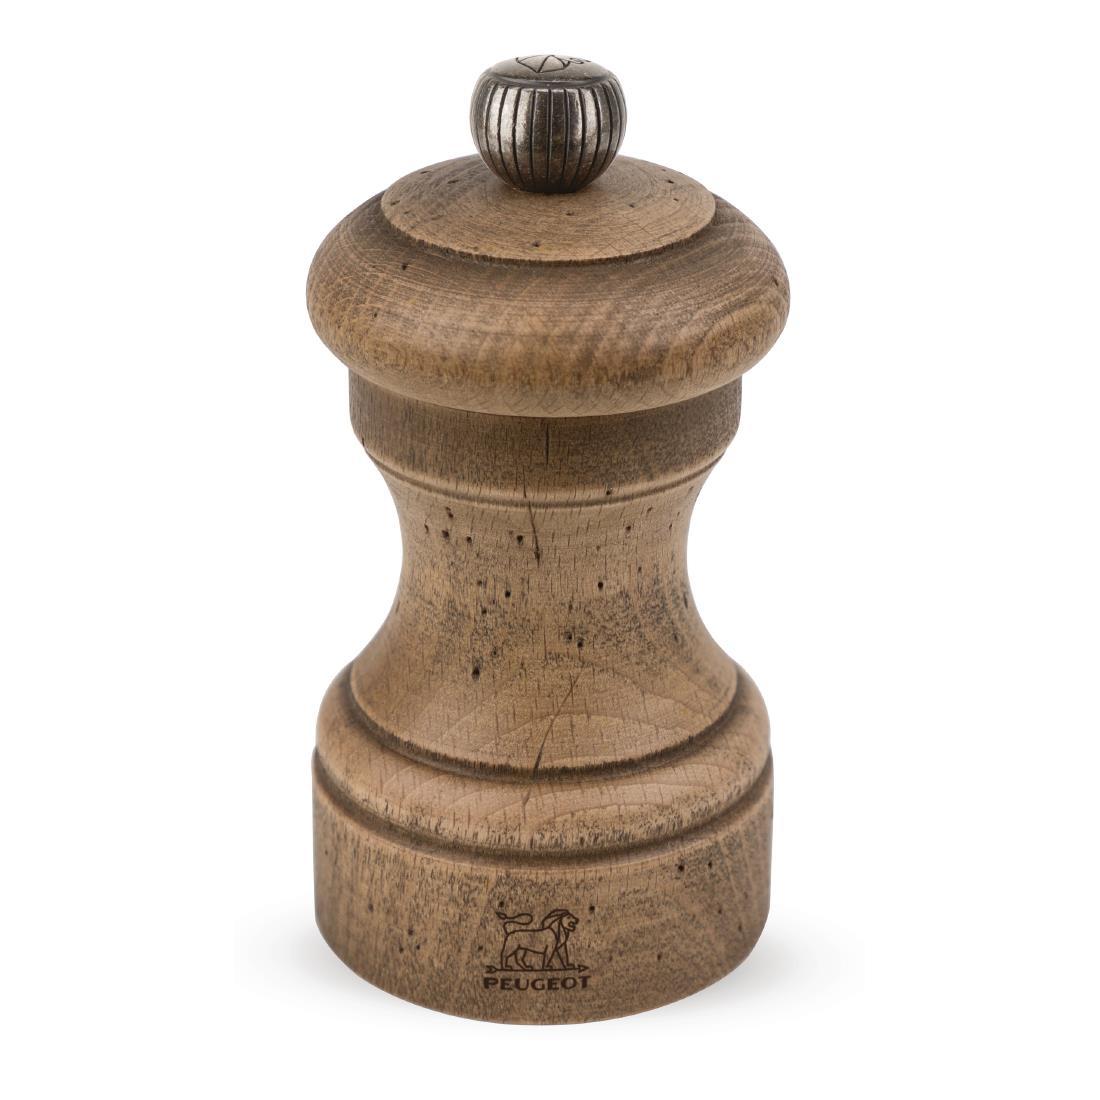 Peugeot Antique Wood Pepper Mill 4in - GN547  - 1